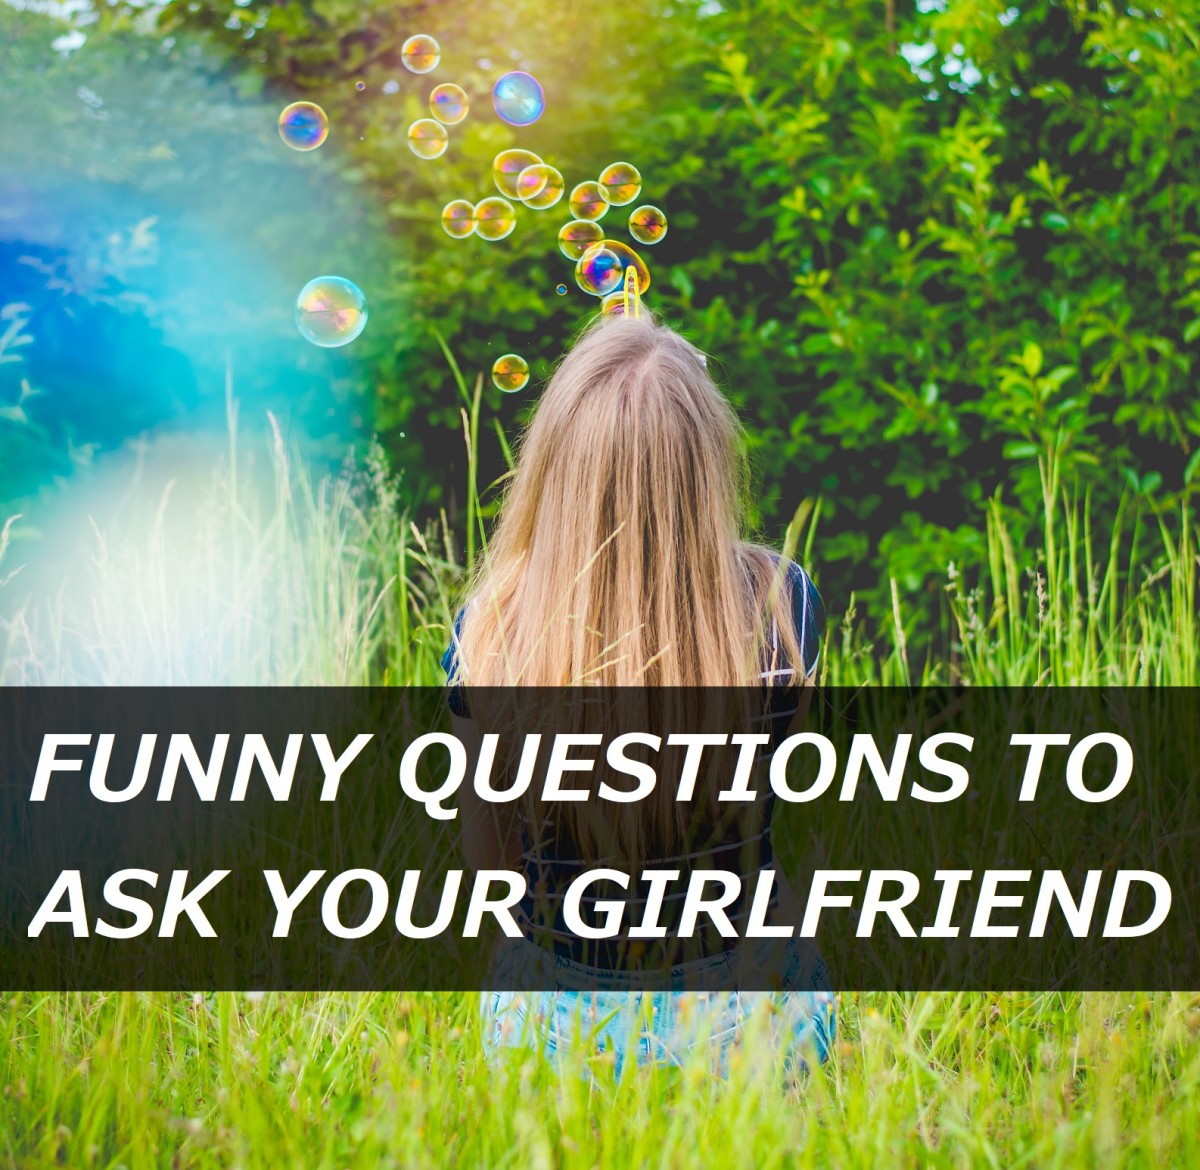 Funny Questions to Ask Your Girlfriend